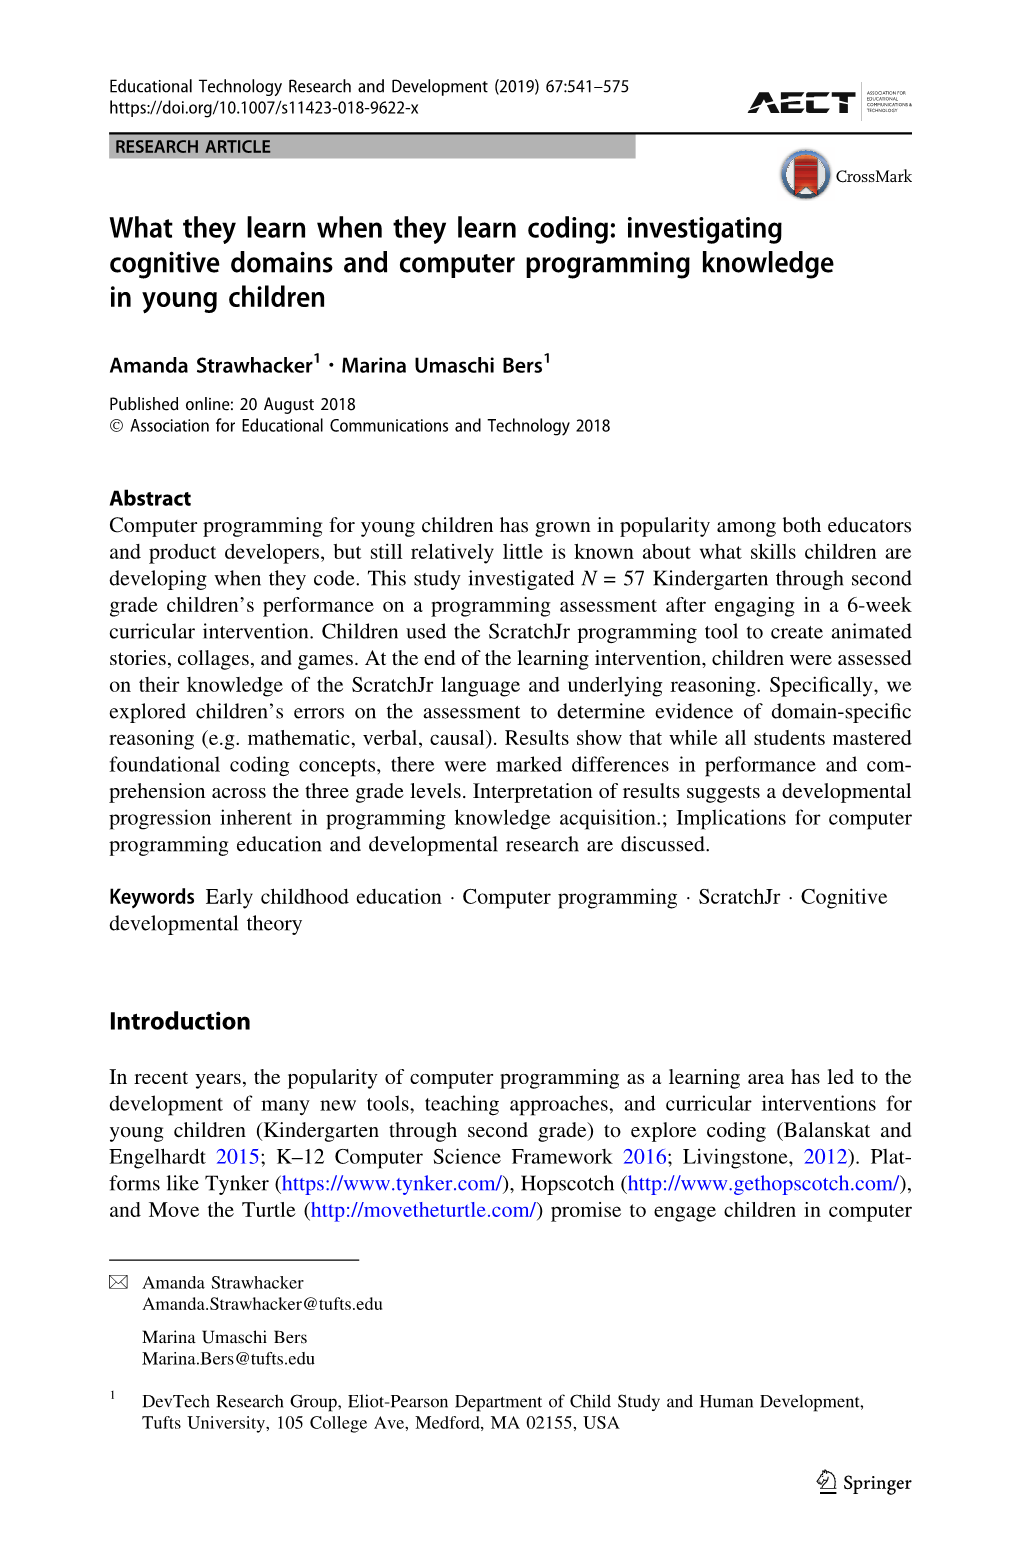 Investigating Cognitive Domains and Computer Programming Knowledge in Young Children